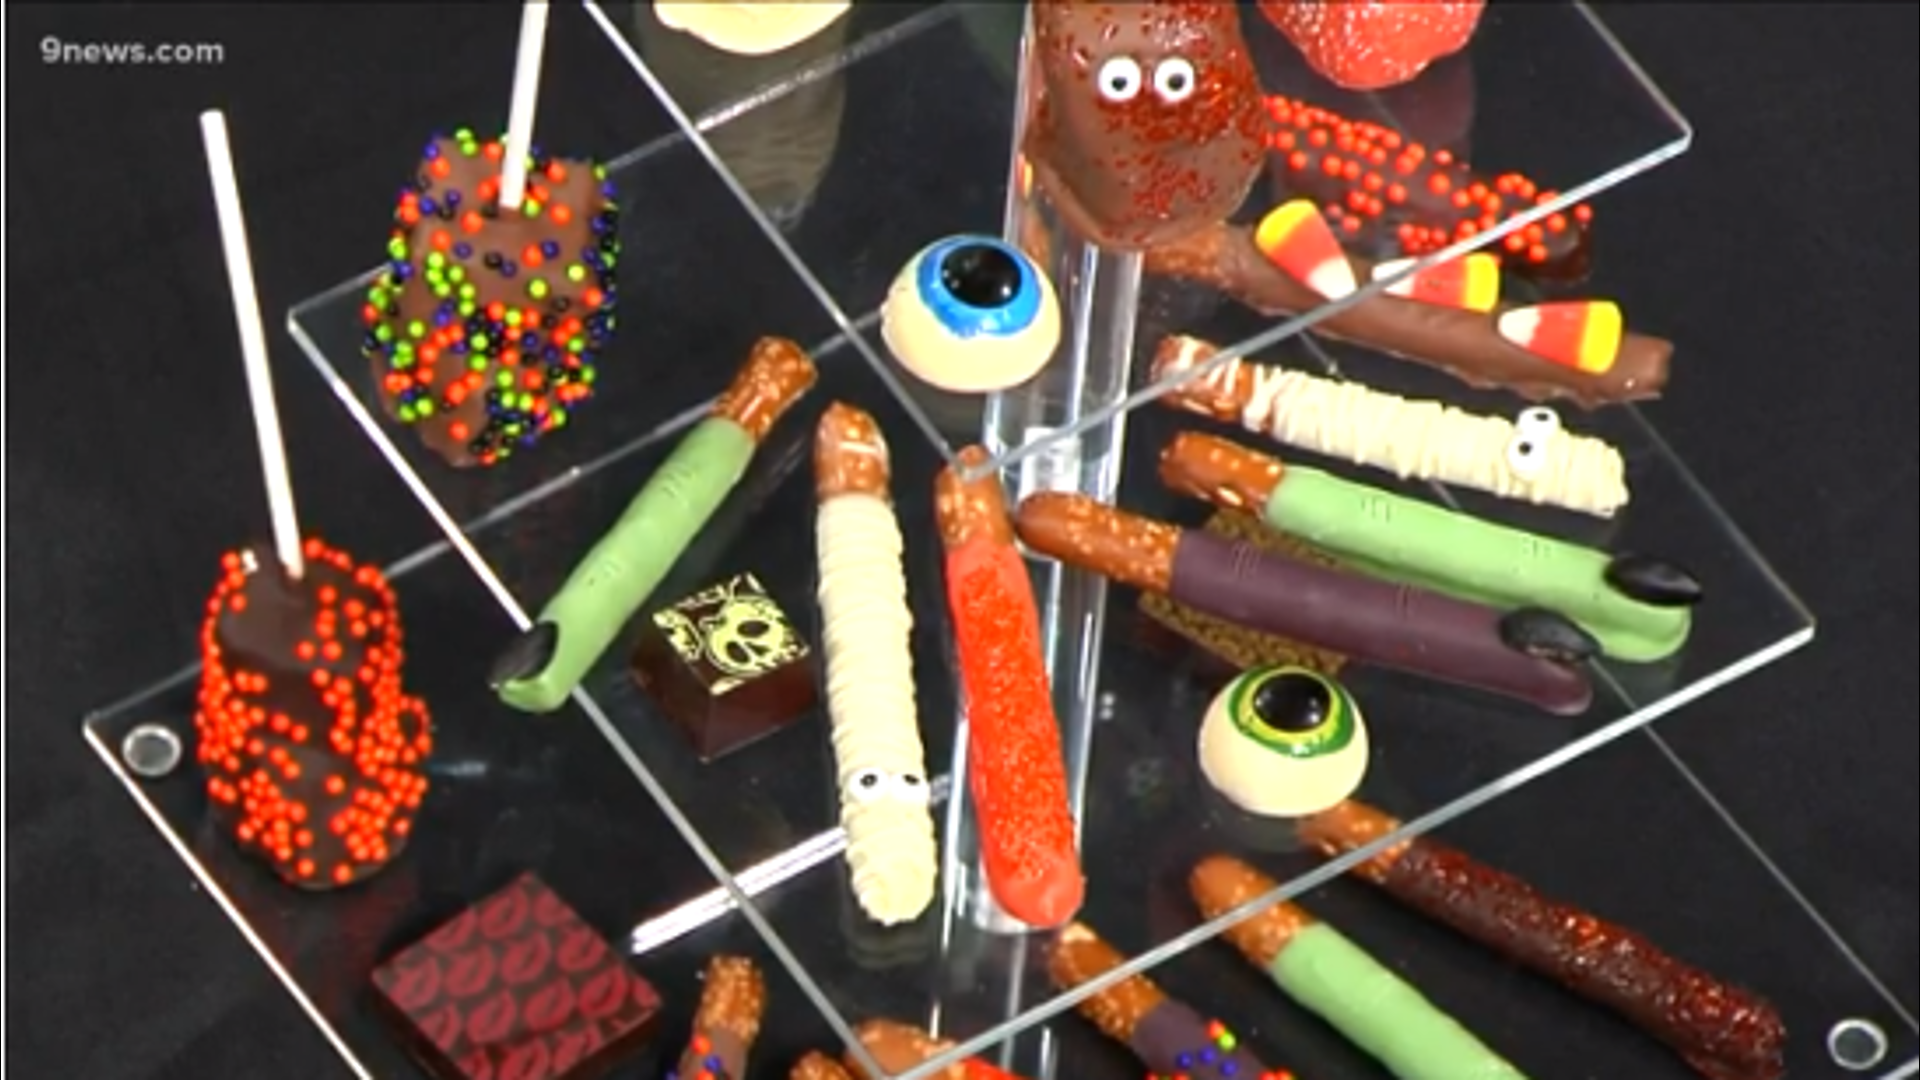 Today we are talking some sweet and easy treats you can make with the kids for Halloween.